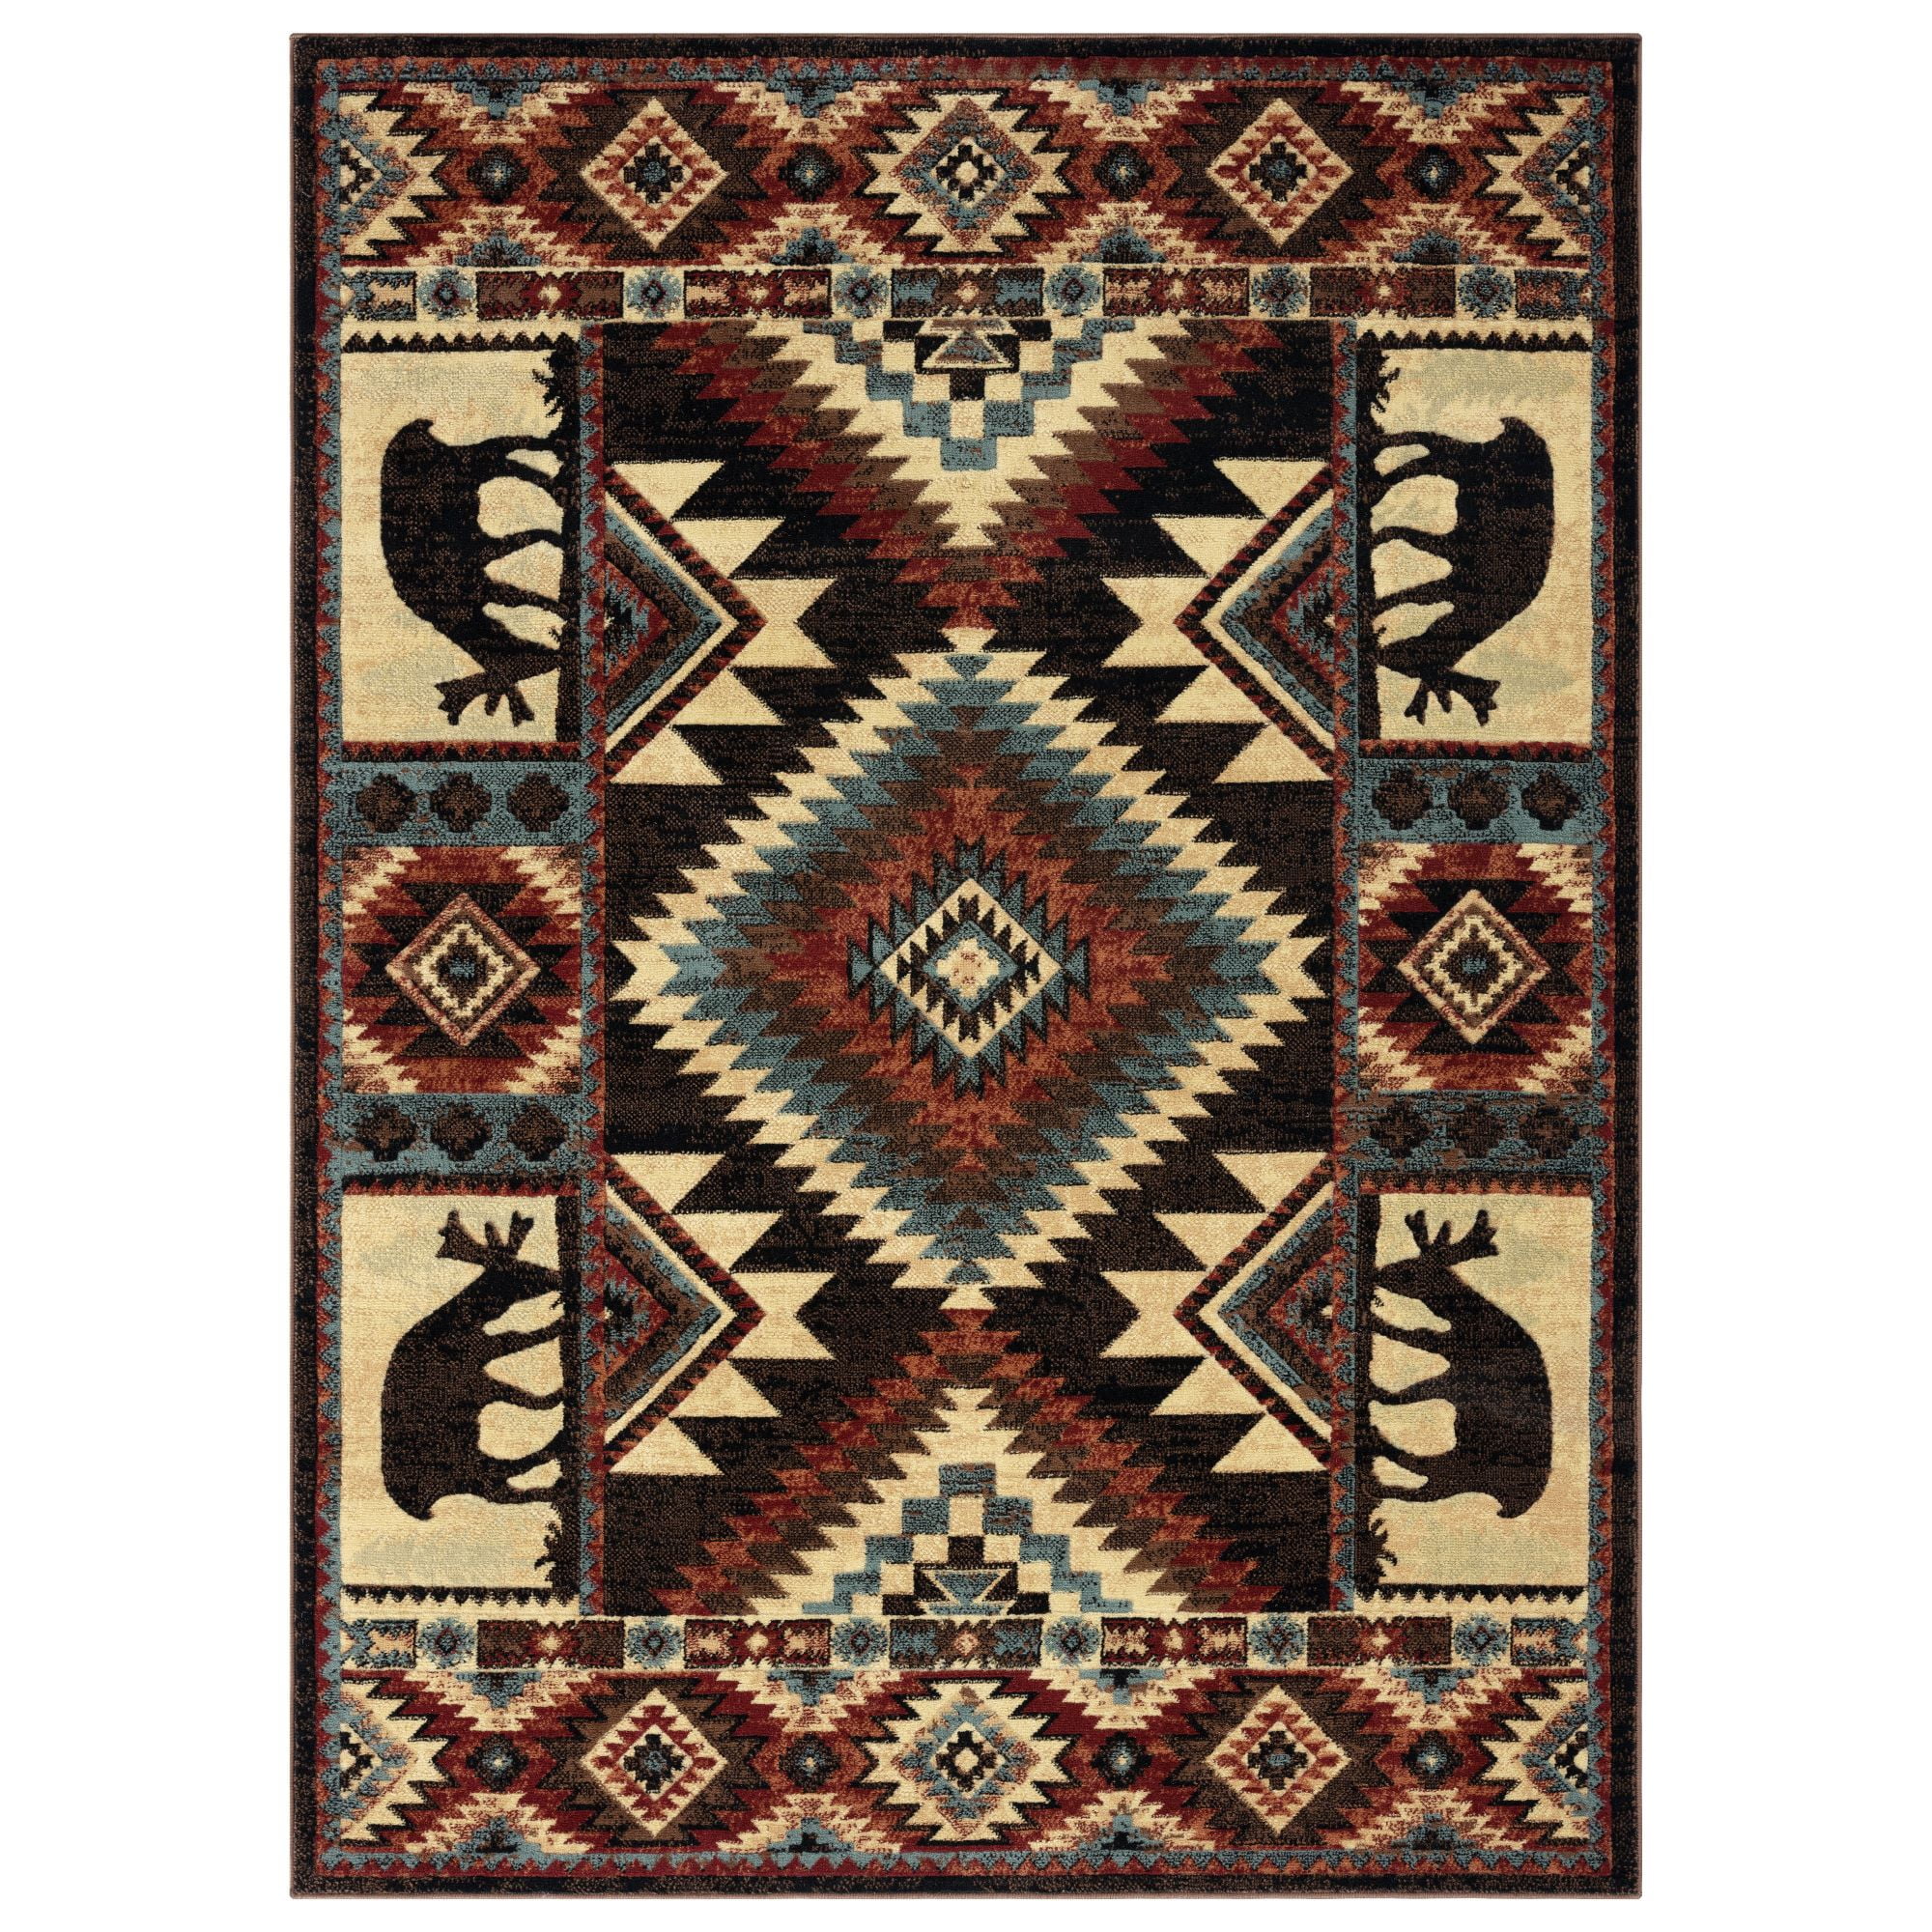 Western Country Southwest Rustic Cowboy Horse Star Lodge Area Rugs Carpets 